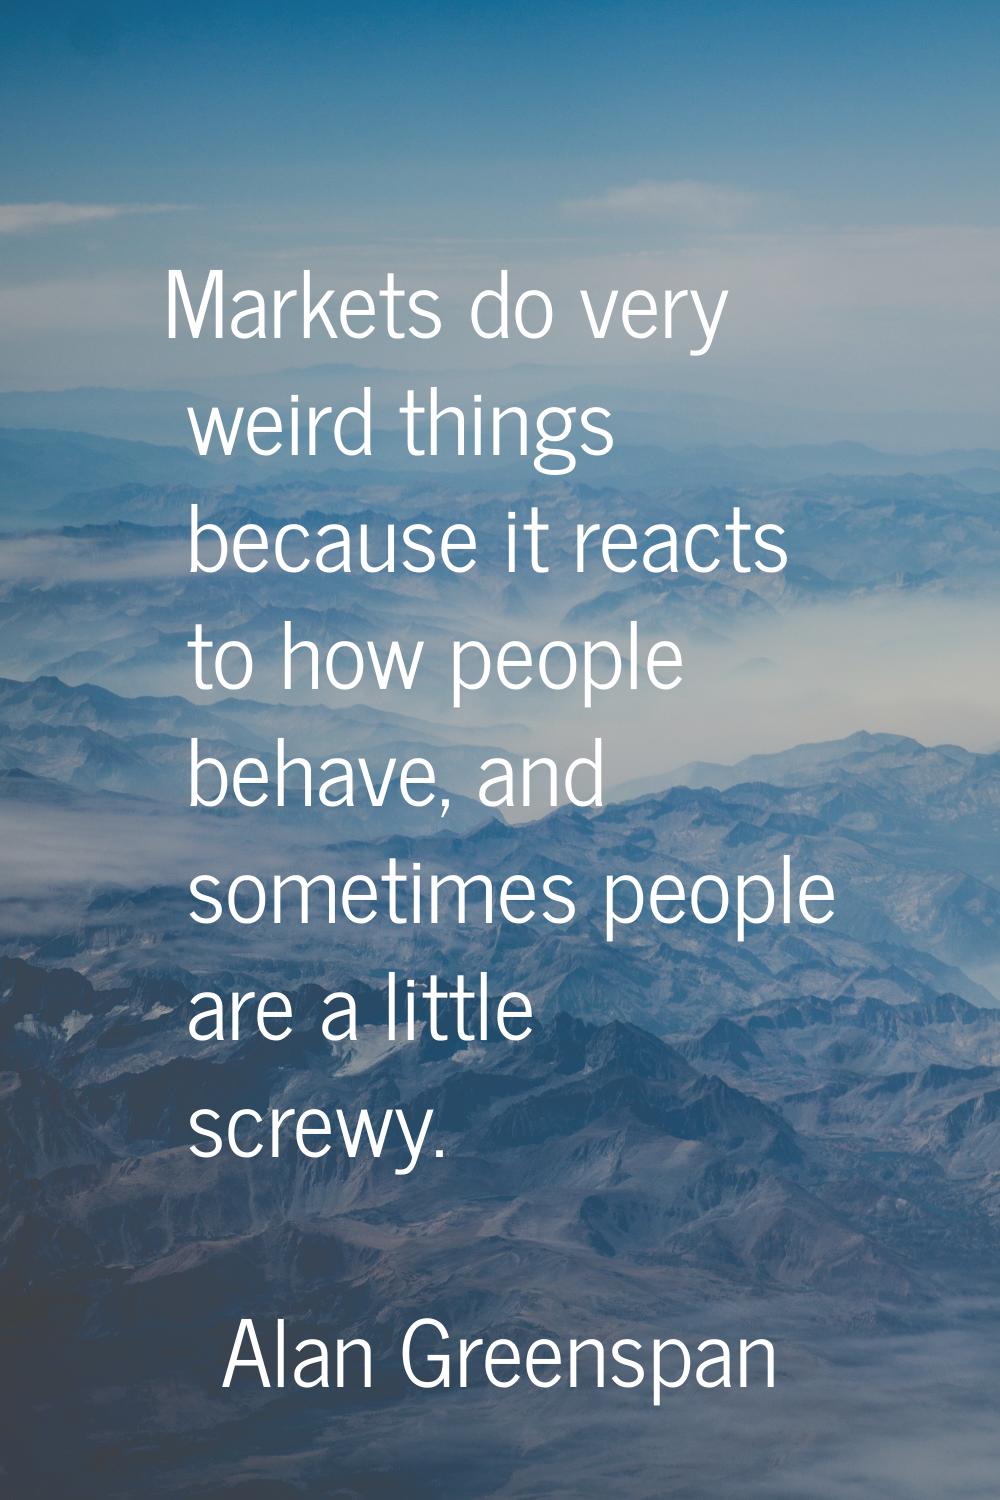 Markets do very weird things because it reacts to how people behave, and sometimes people are a lit